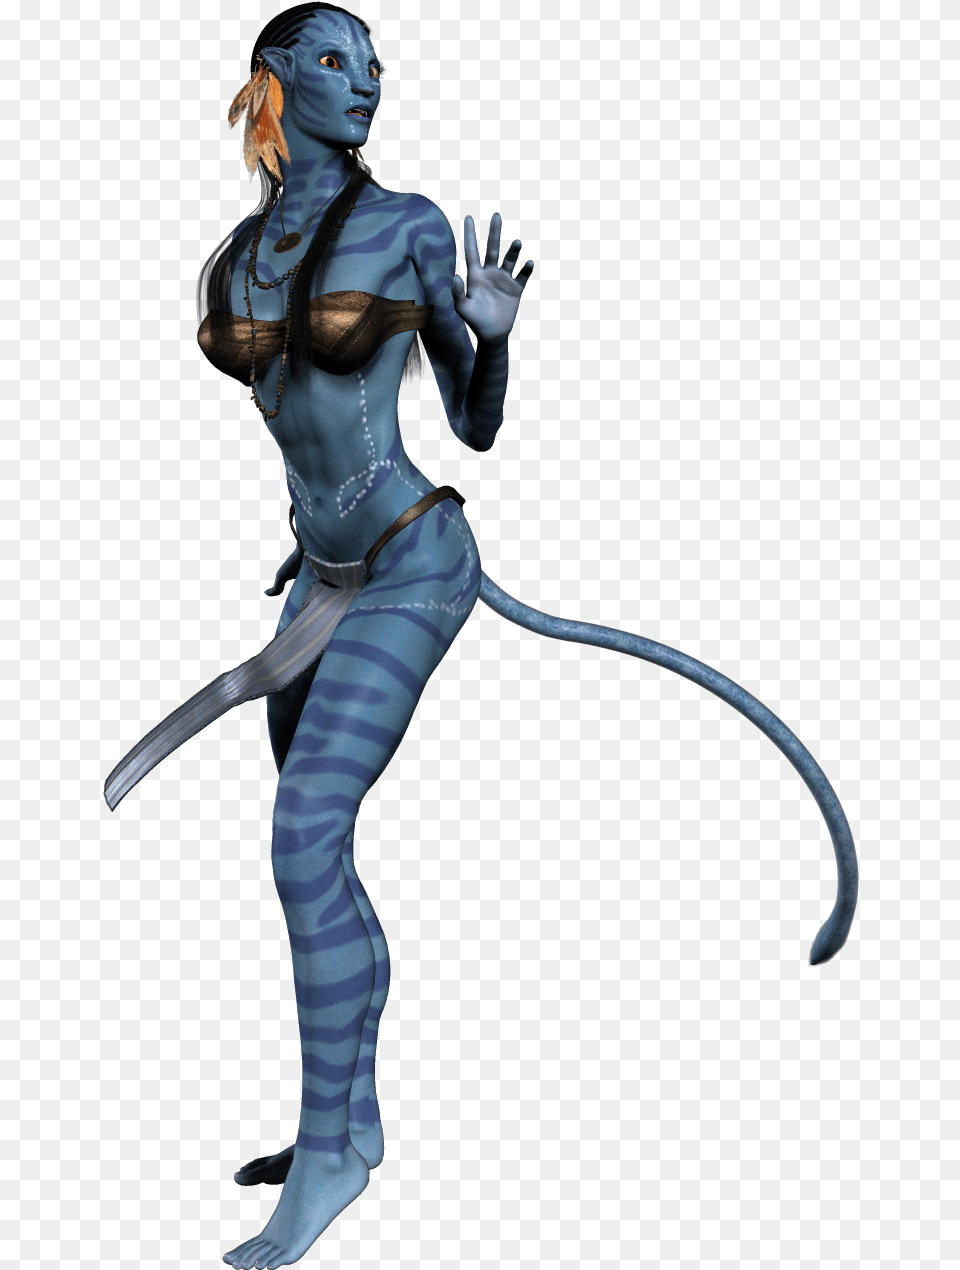 Download Hd Avatar Neytiri Image Avatar Movie, Adult, Female, Person, Woman Free Transparent Png